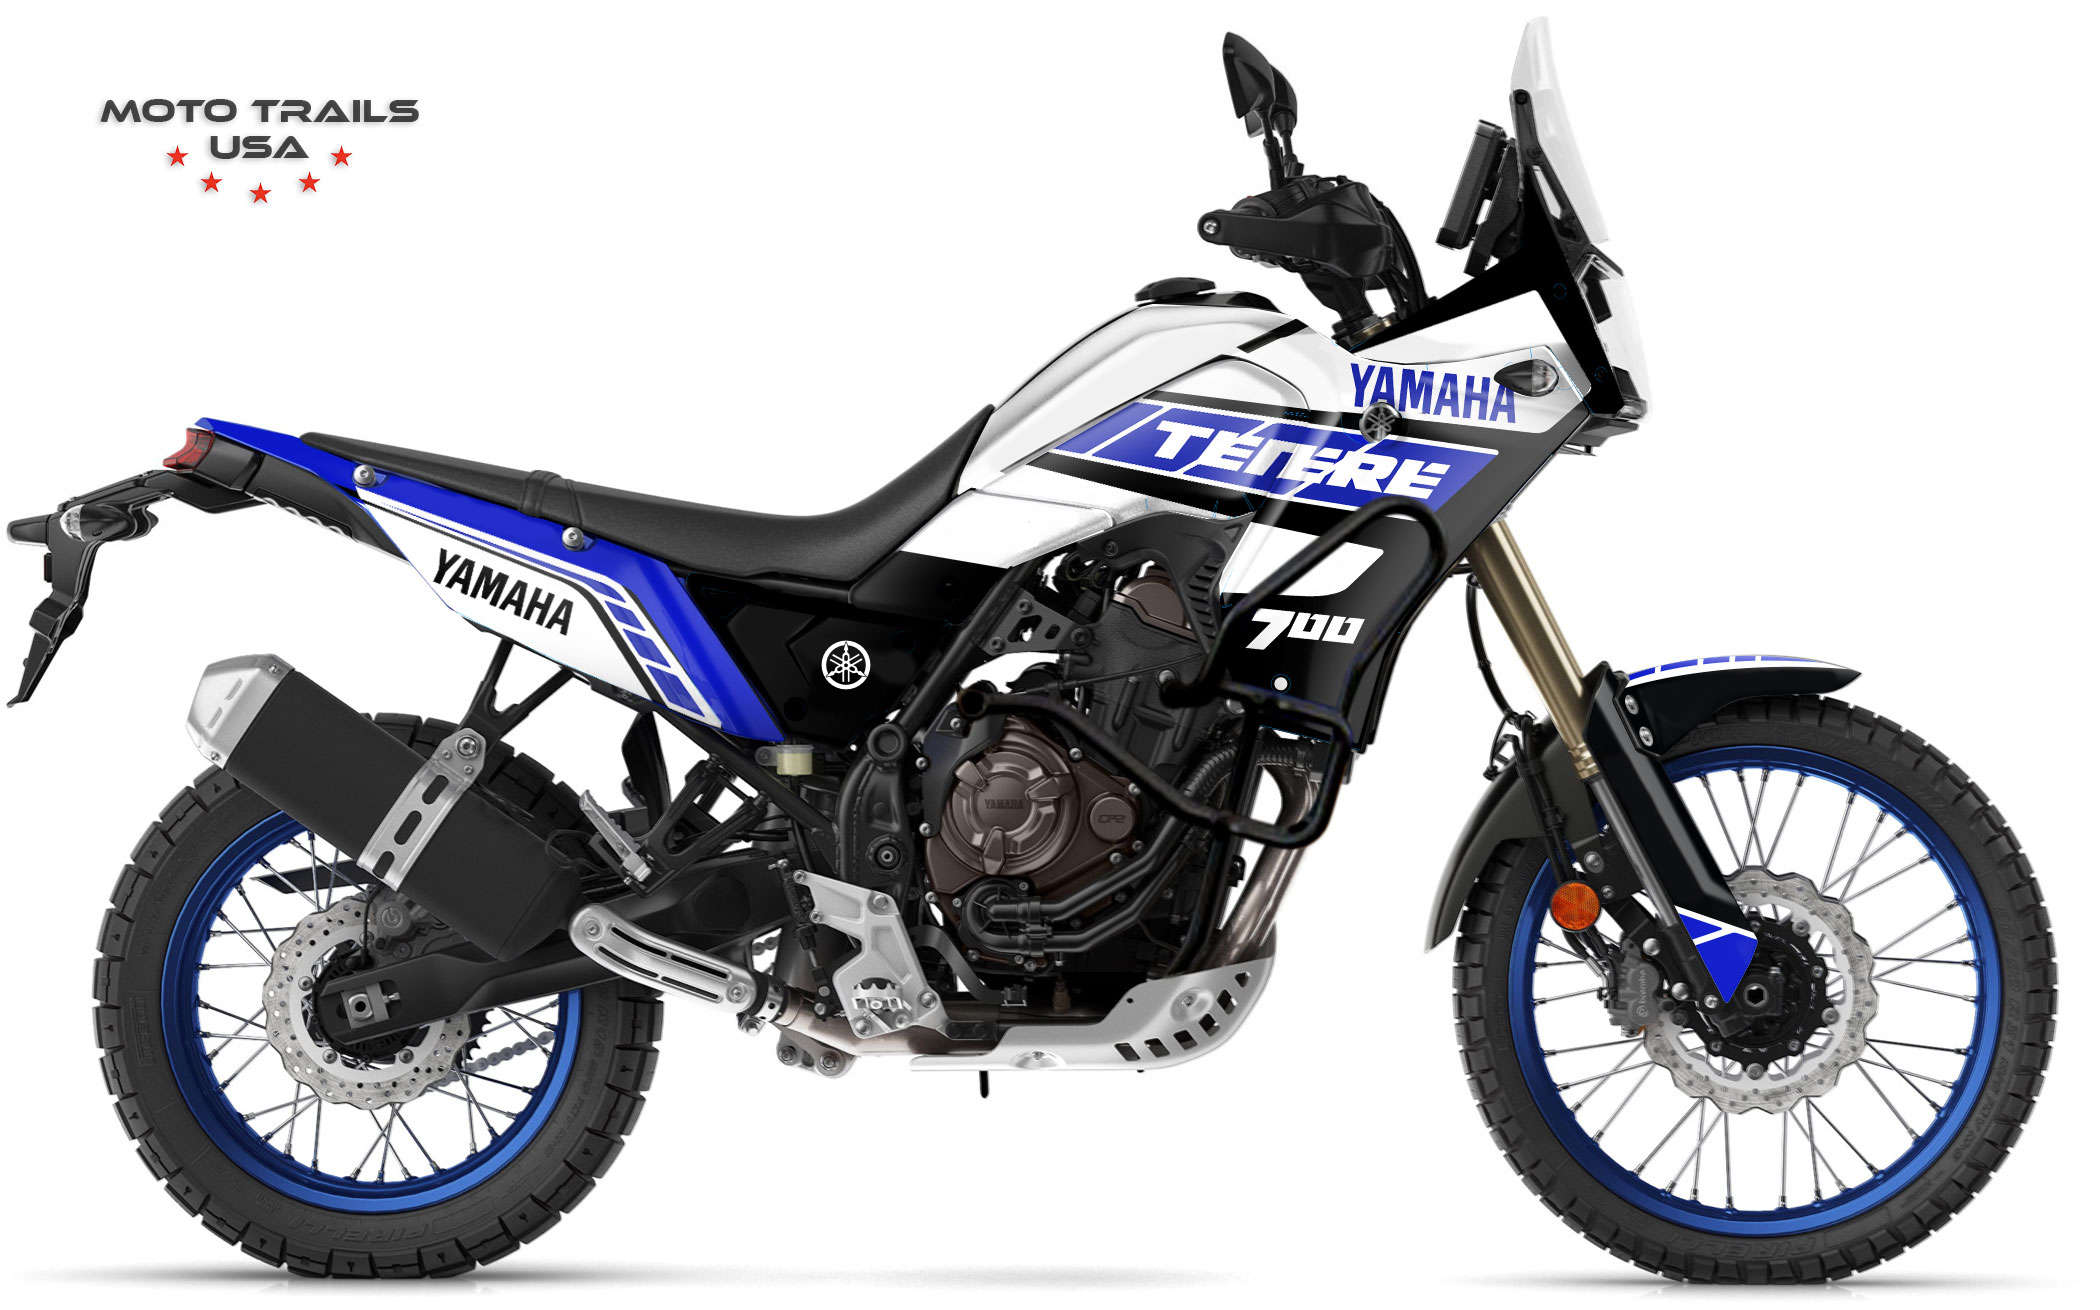 Tenere 700 Decals – “700-No logo” – Racing Blue  Moto Trails USA motorcycle  tours in the USA - Yamaha Tenere 700 - Continental Divide